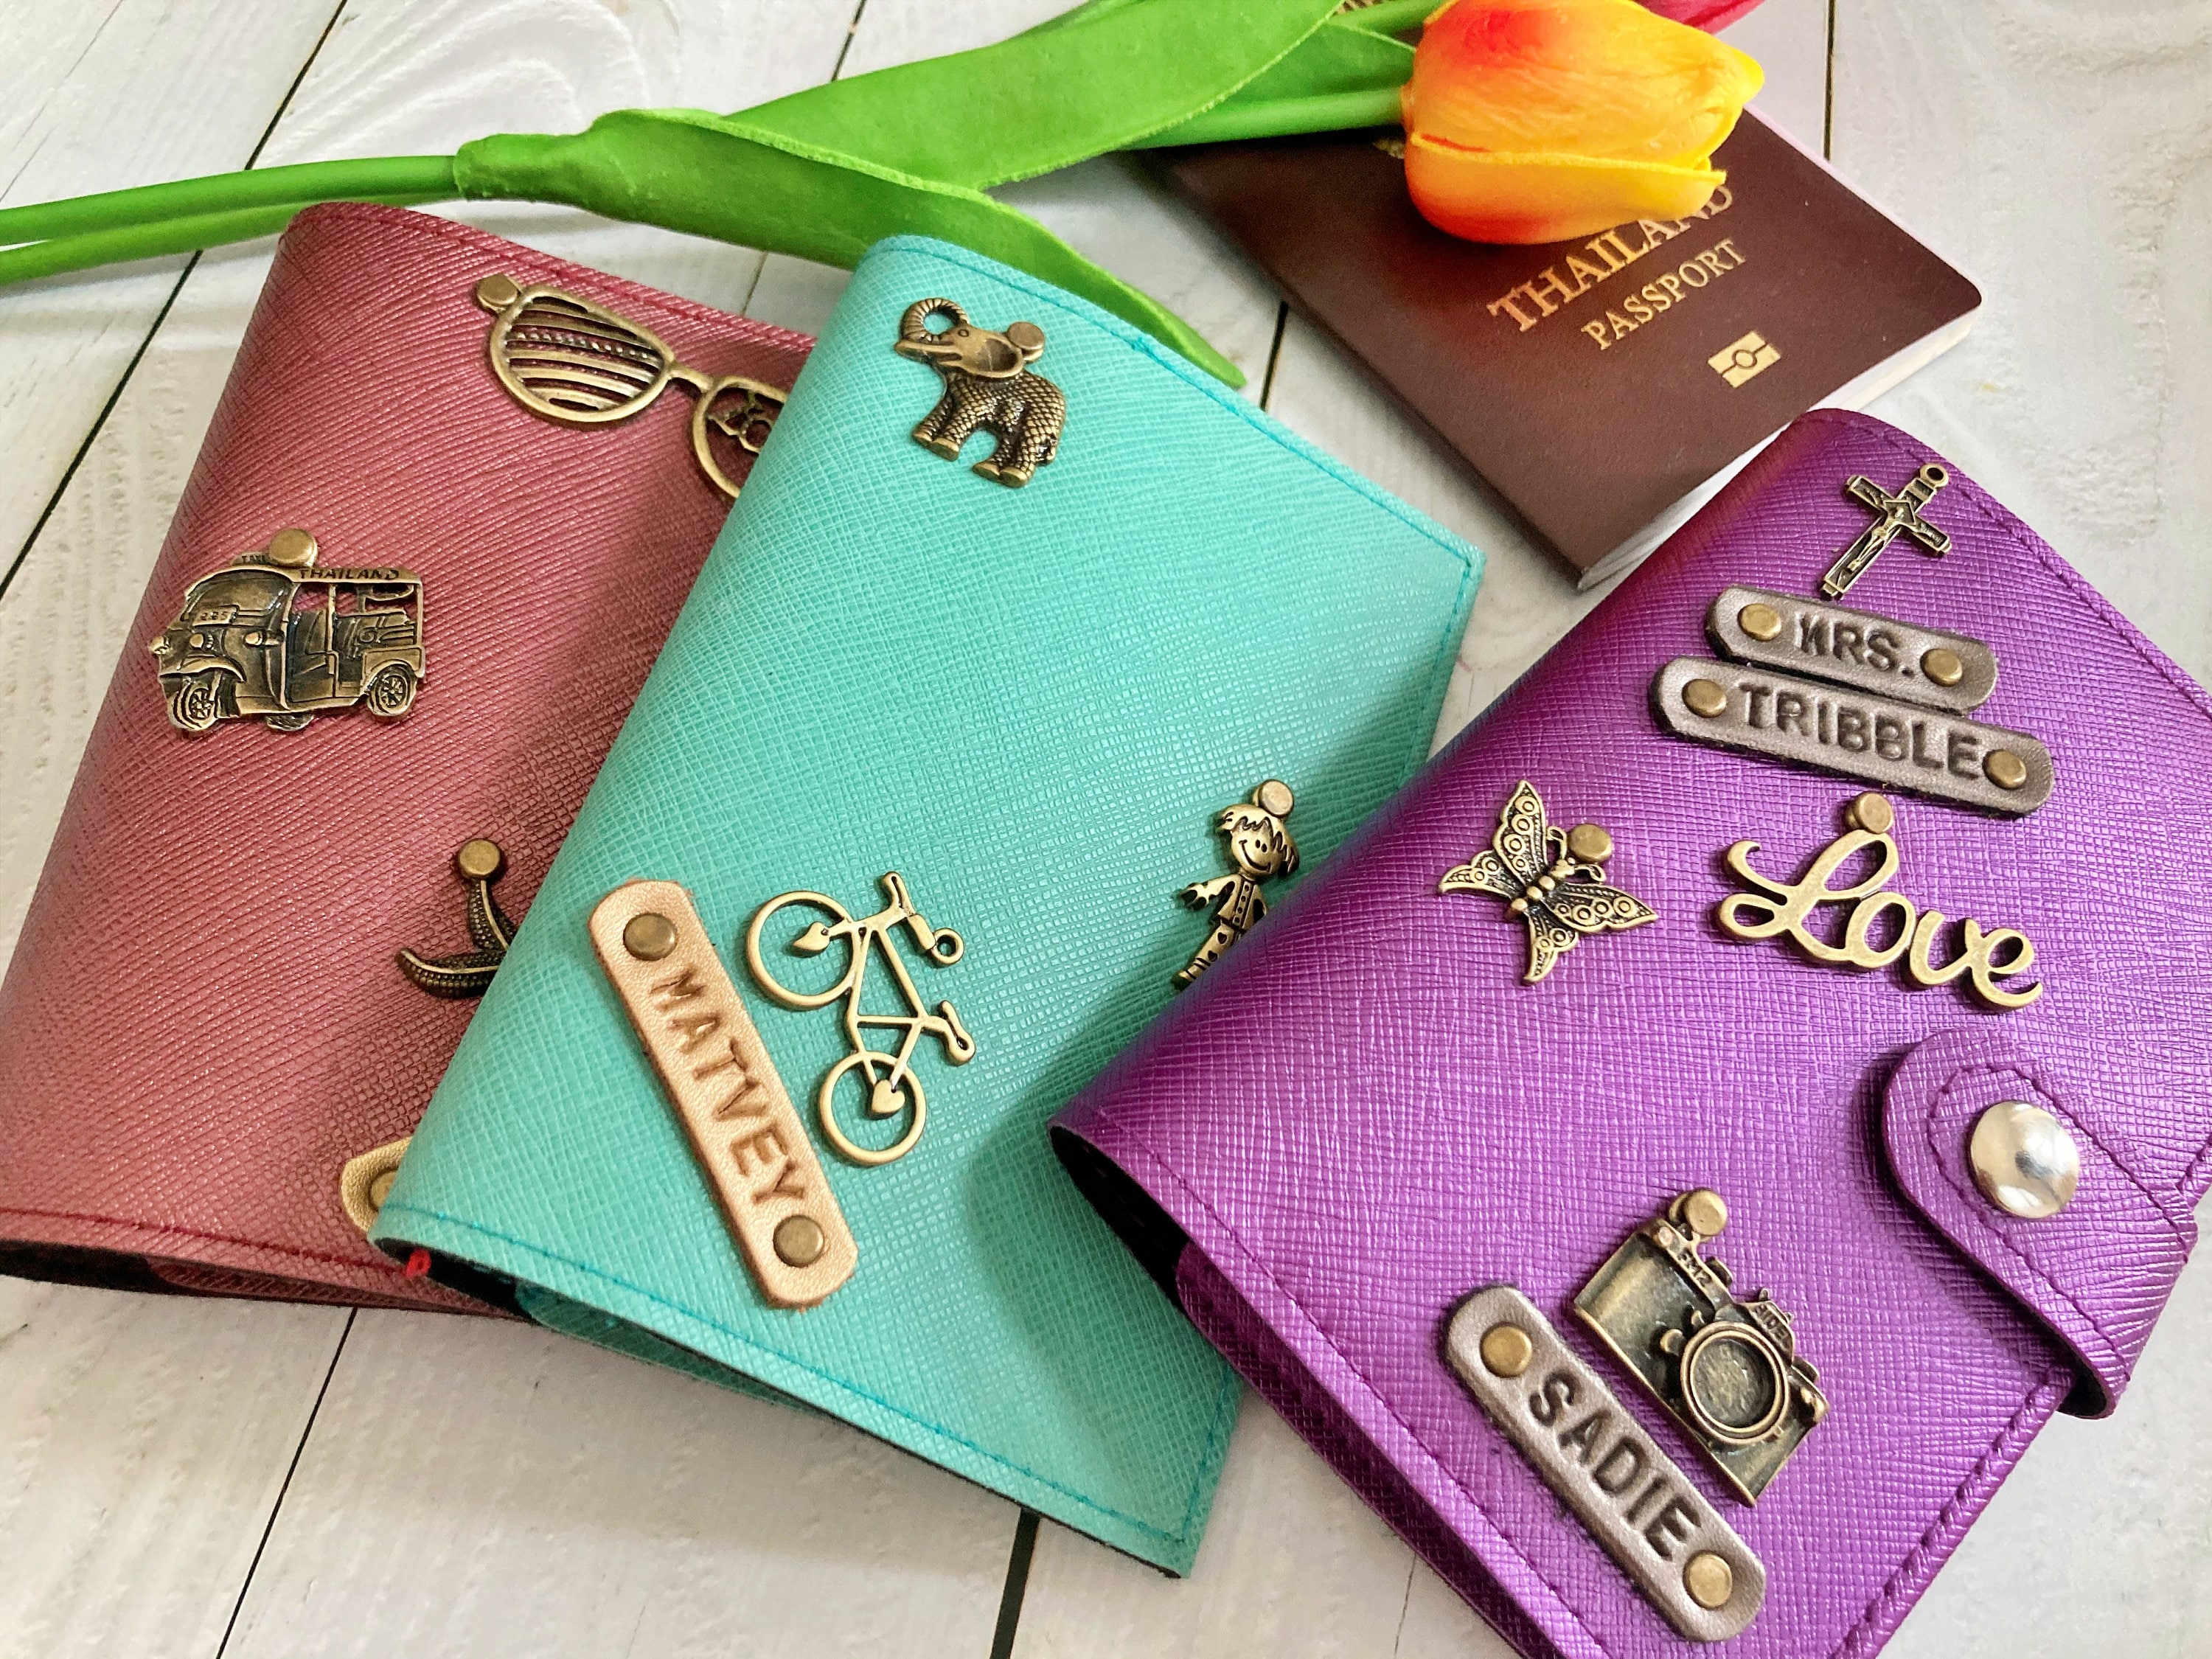 Personalized Passport Covers